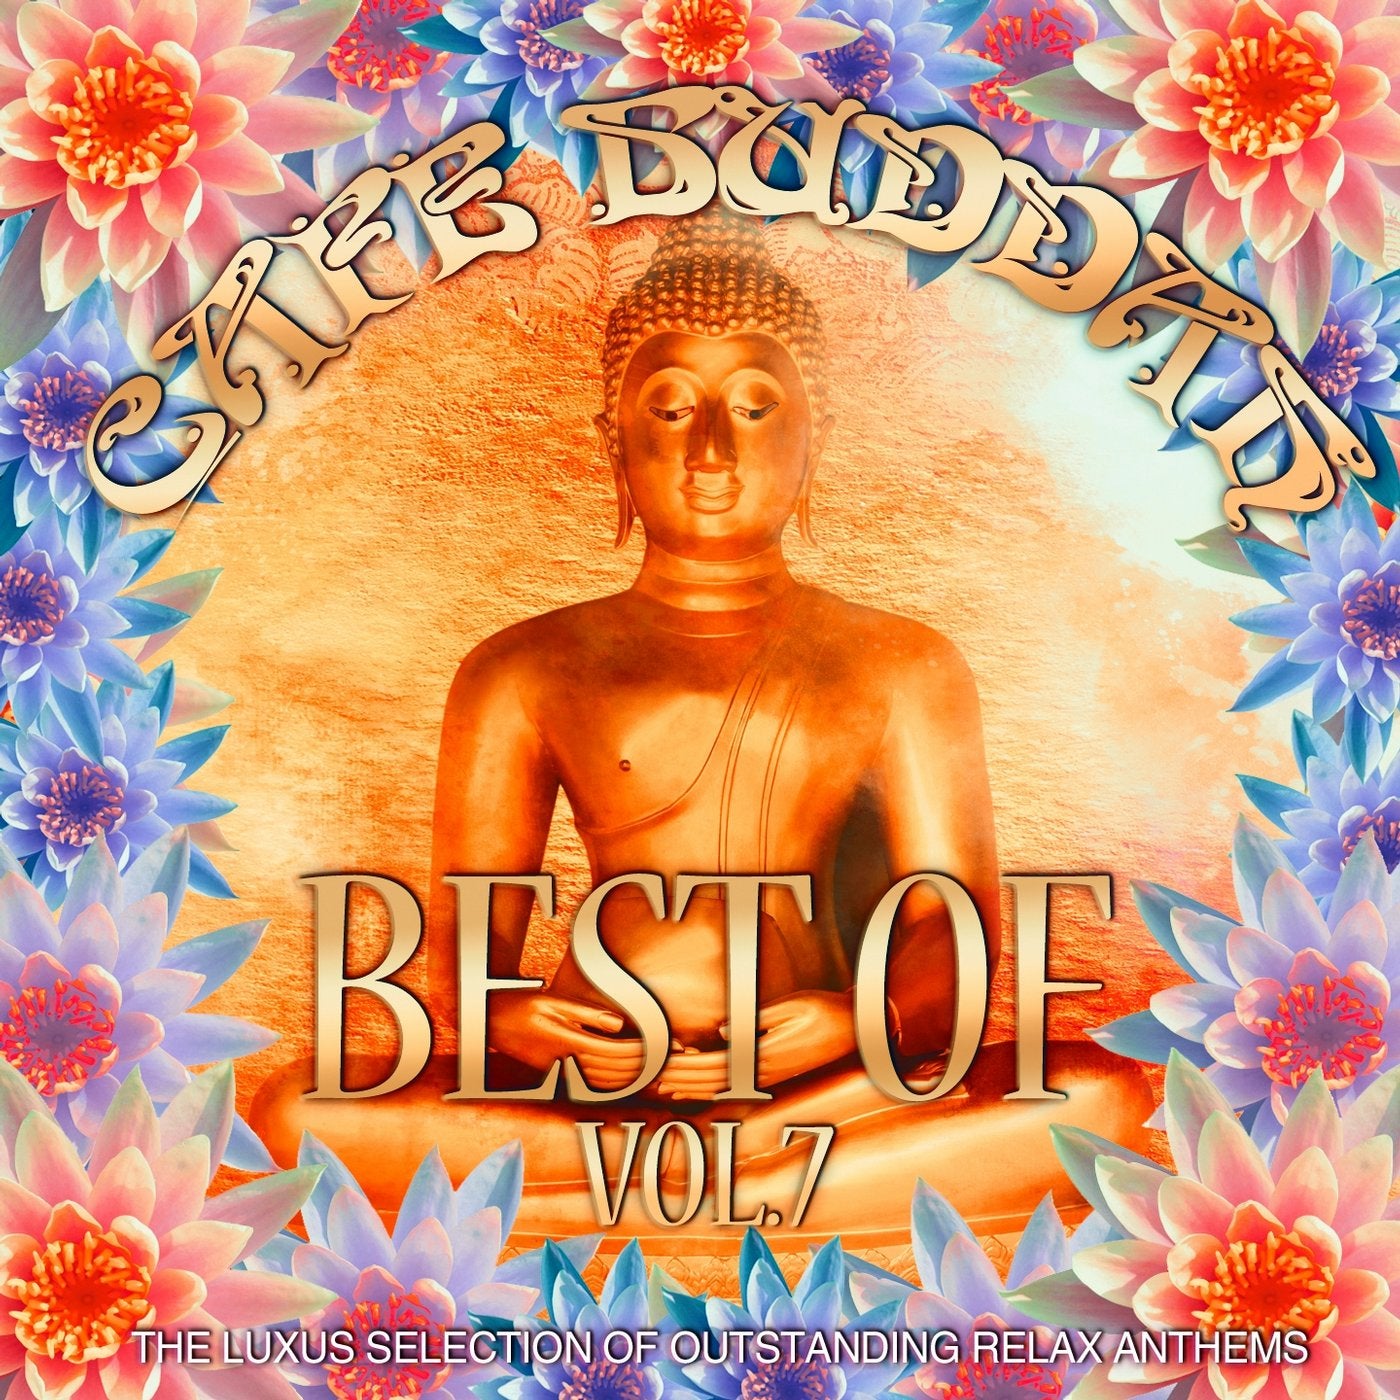 Cafe Buddah Best of, Vol. 7 (The Luxus Selection of Outstanding Relax Anthems)